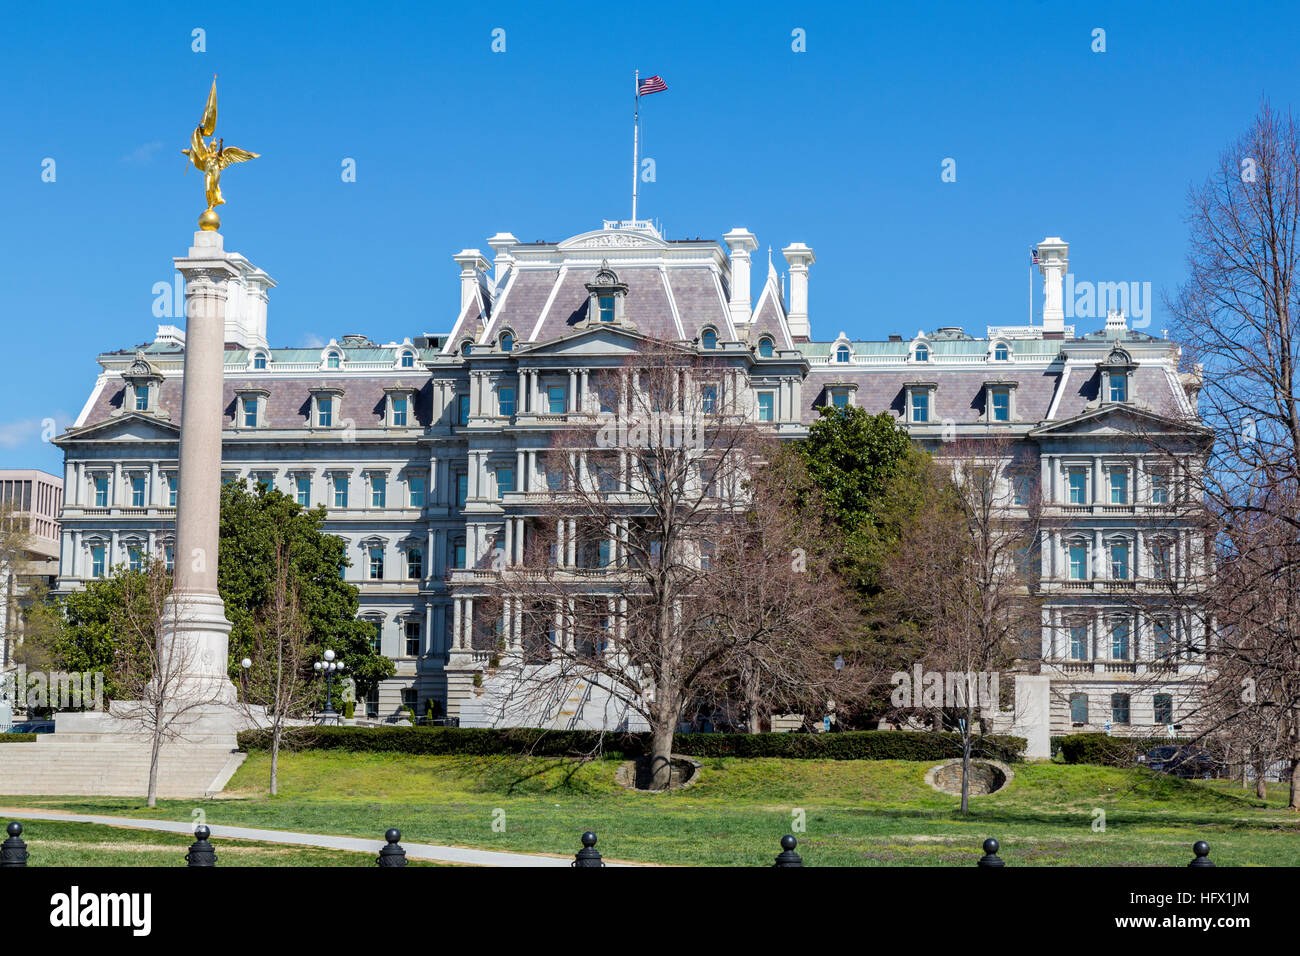 Eisenhower Executive Office Building, Washington, D.C.  Formerly the Old Executive Office Building.  Vice President's Office. Stock Photo